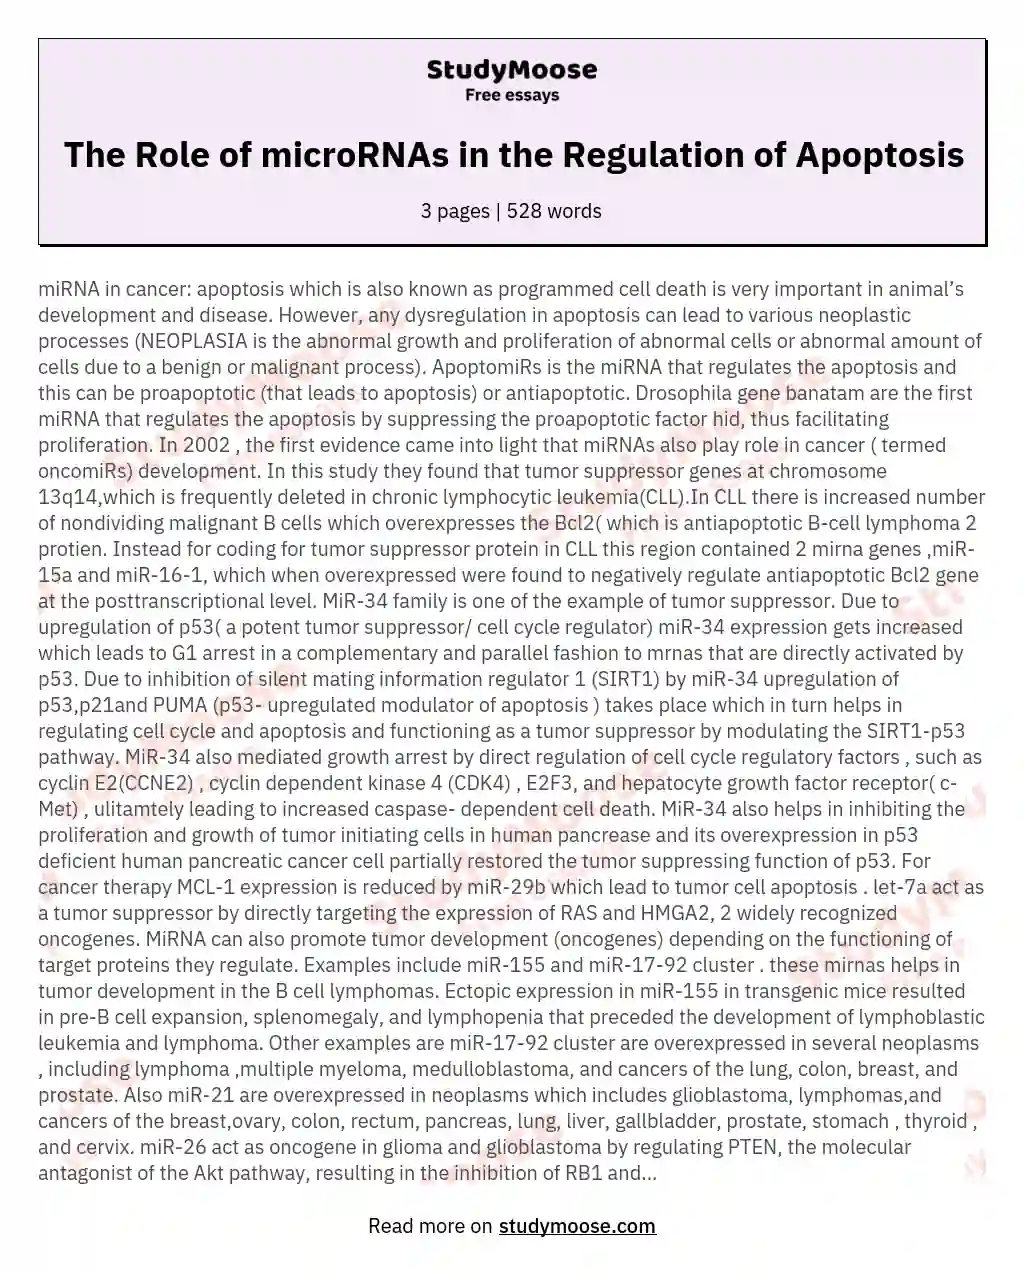 The Role of microRNAs in the Regulation of Apoptosis essay